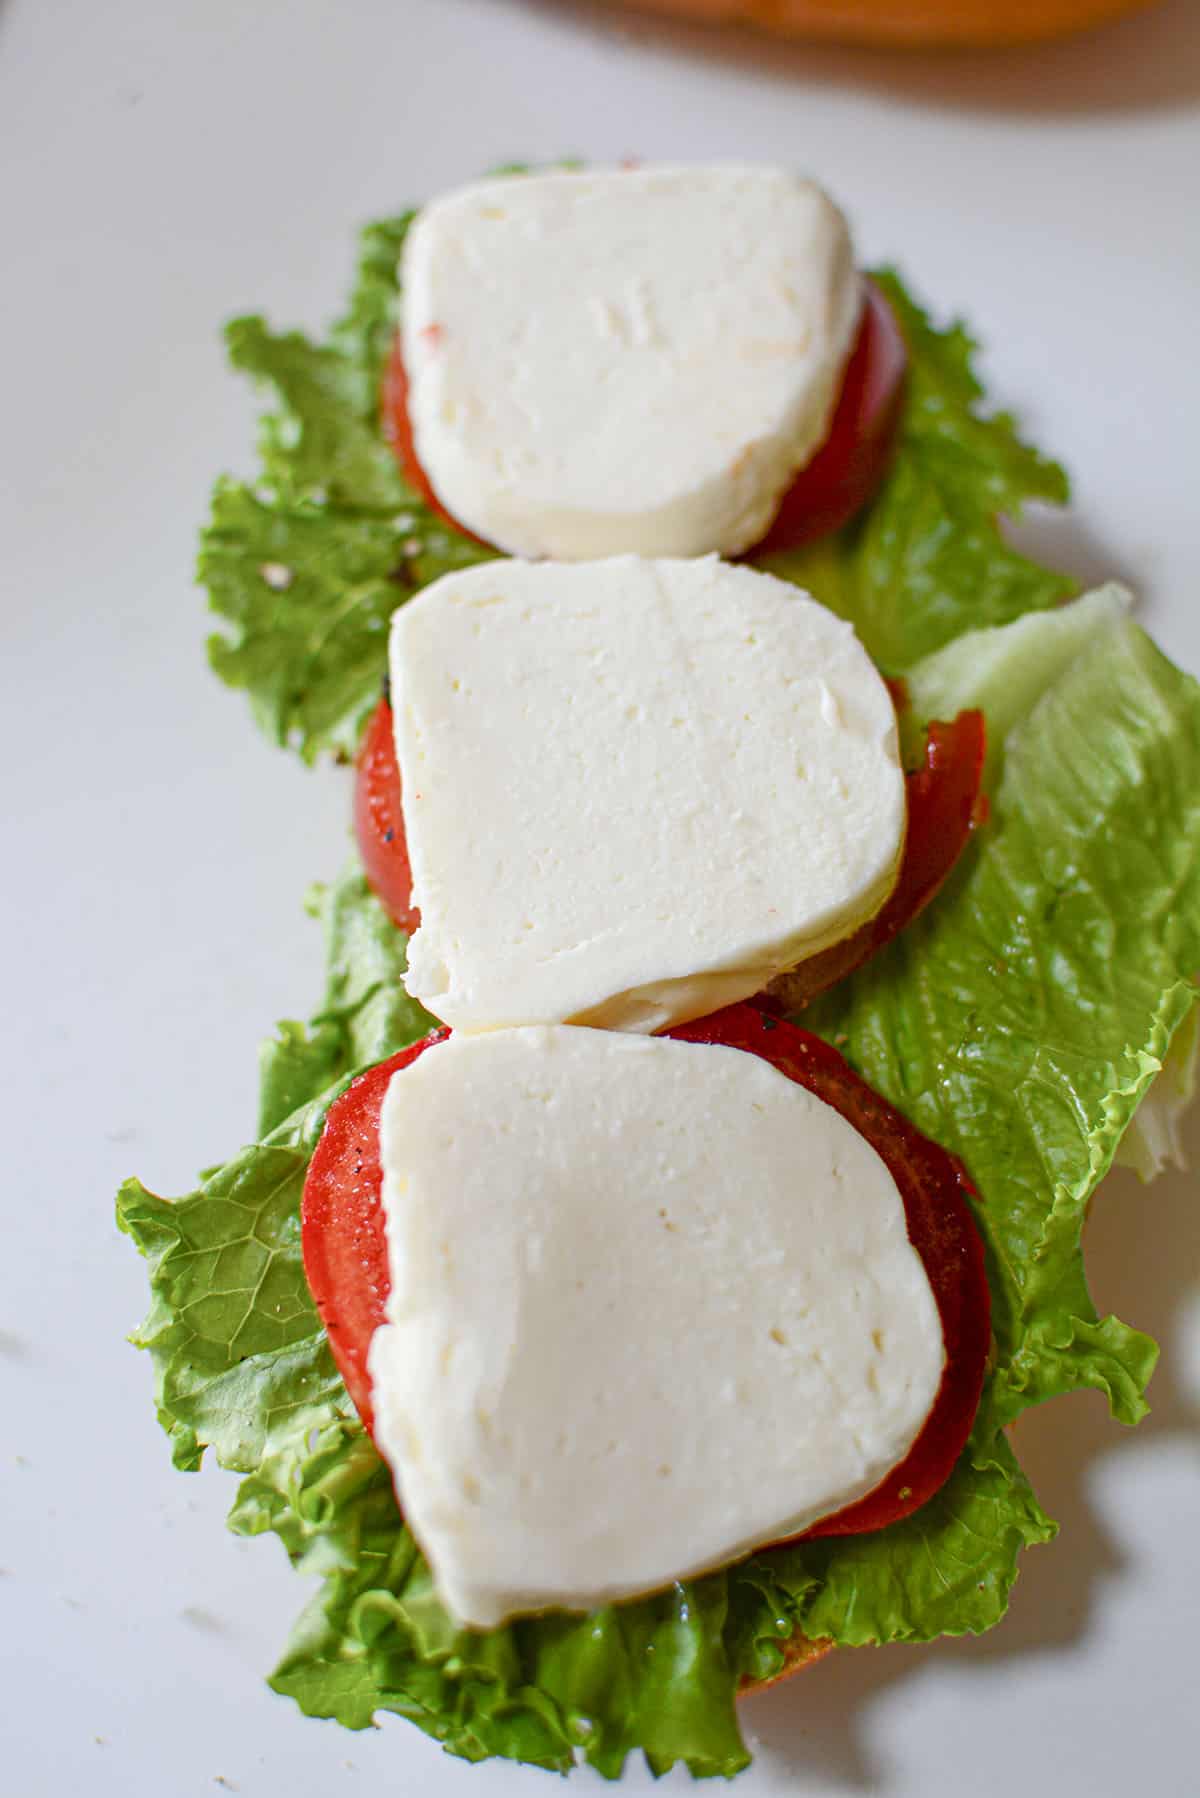 Sliced fresh mozzarella cheese is placed on top of the tomatoes for the sandwich. 